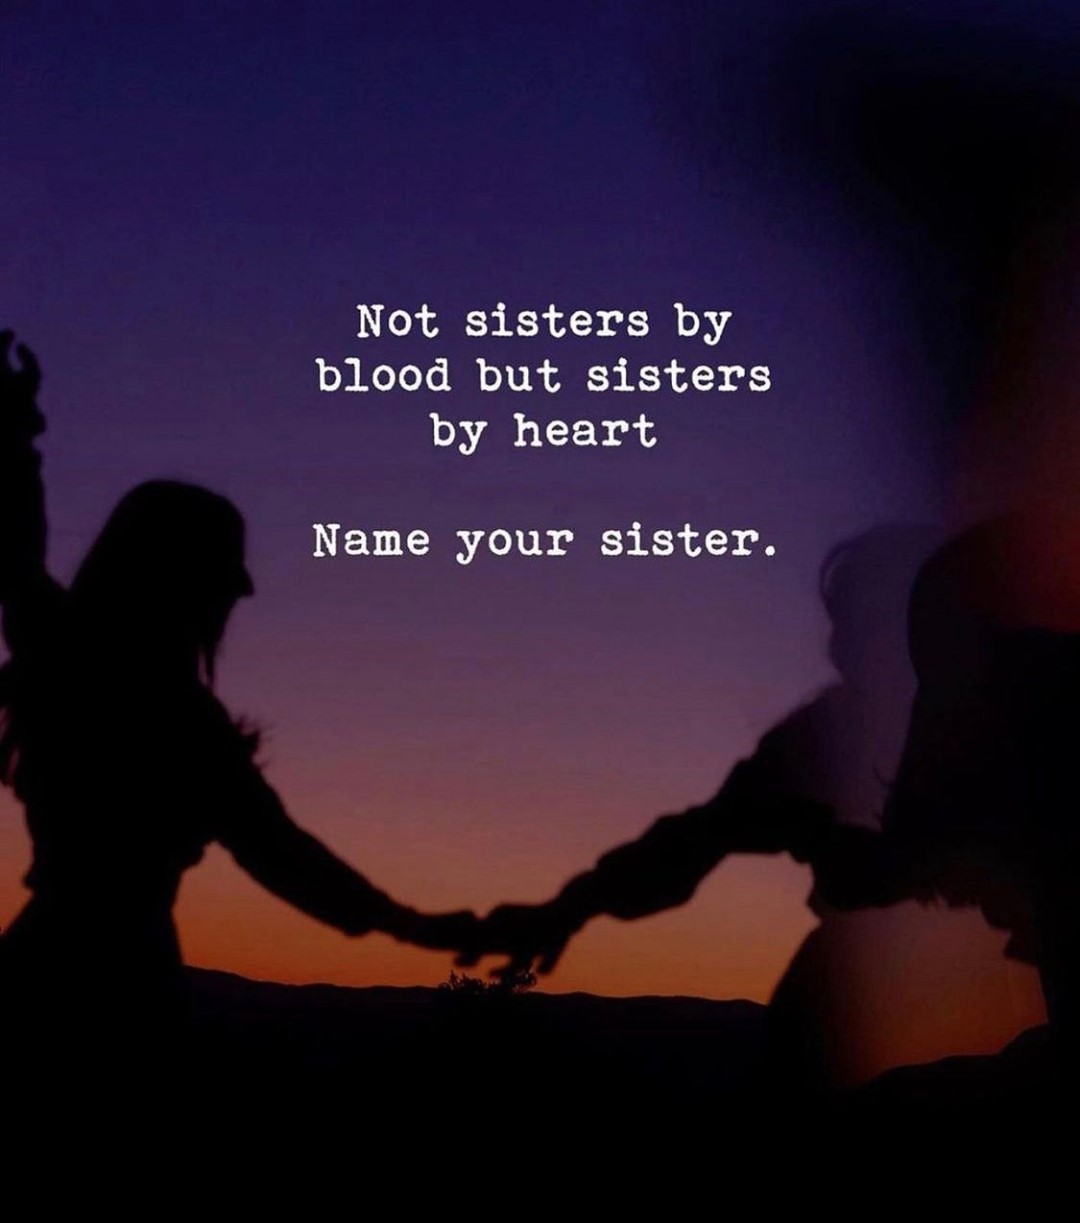 Not sisters by blood but sisters by heart. Name your sister.